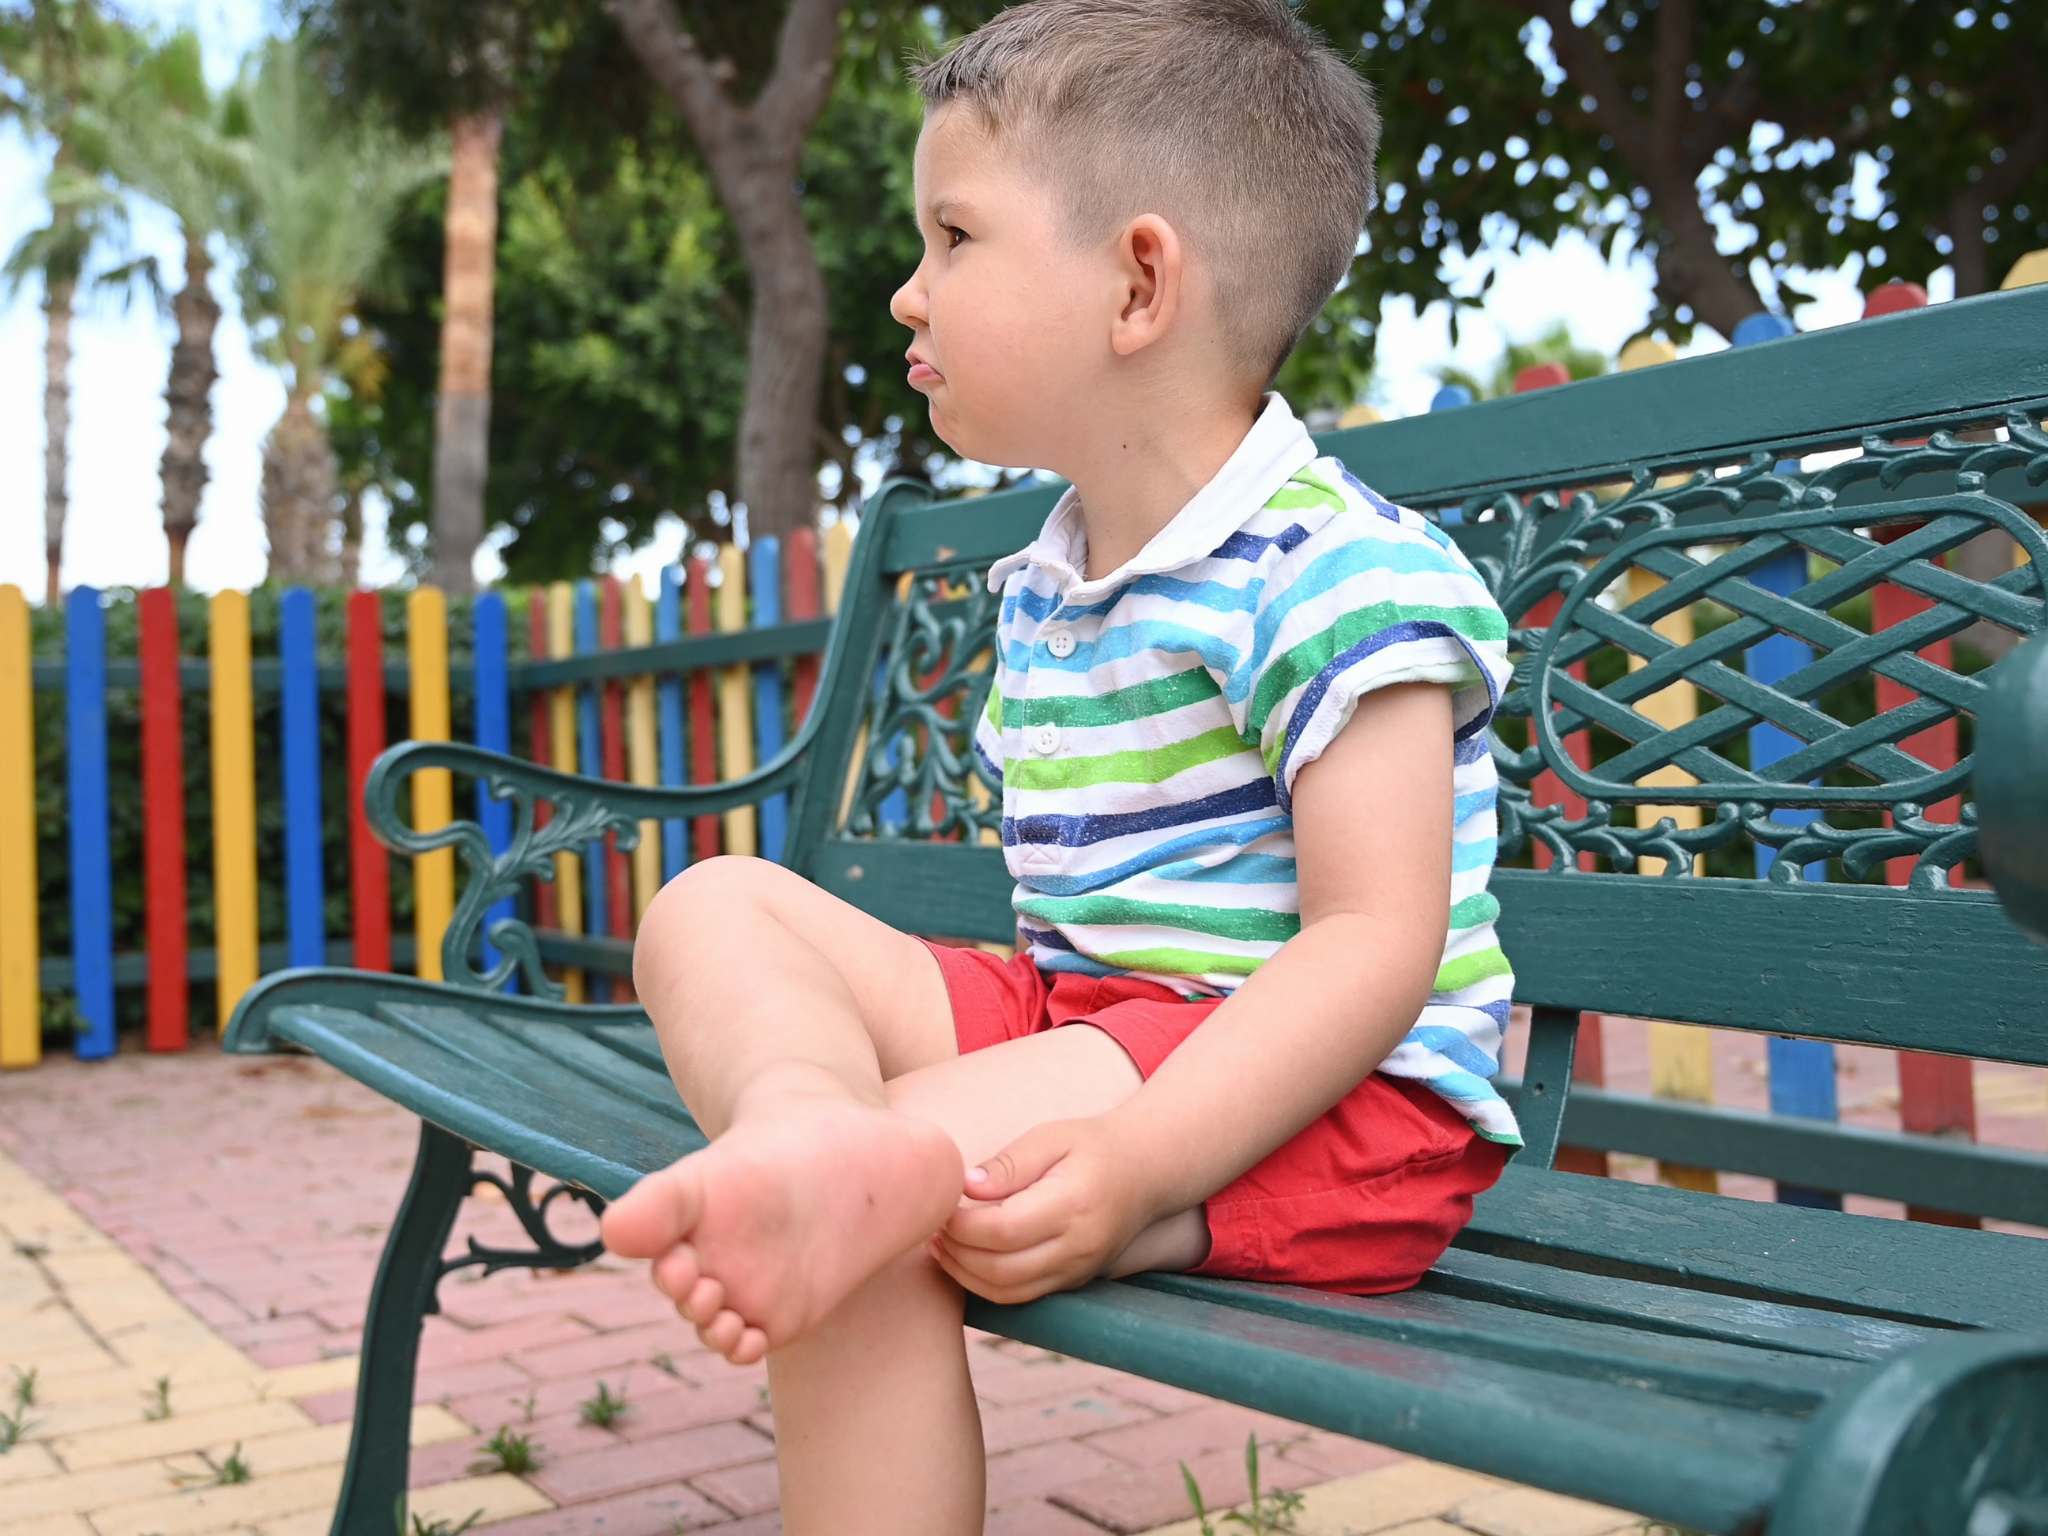 A child injured his foot while playing in the playground